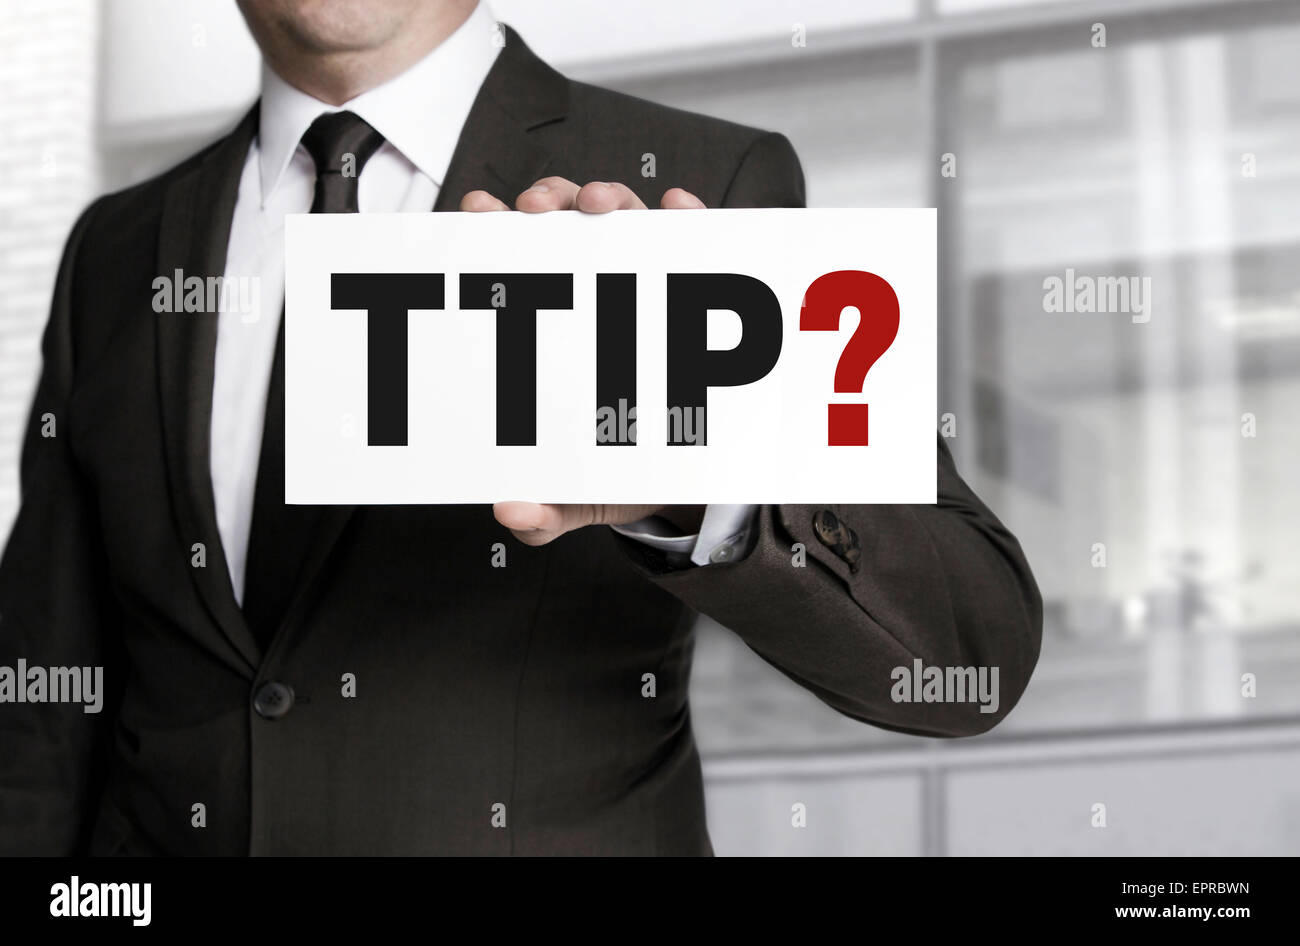 TTIP sign is held by businessman. Stock Photo